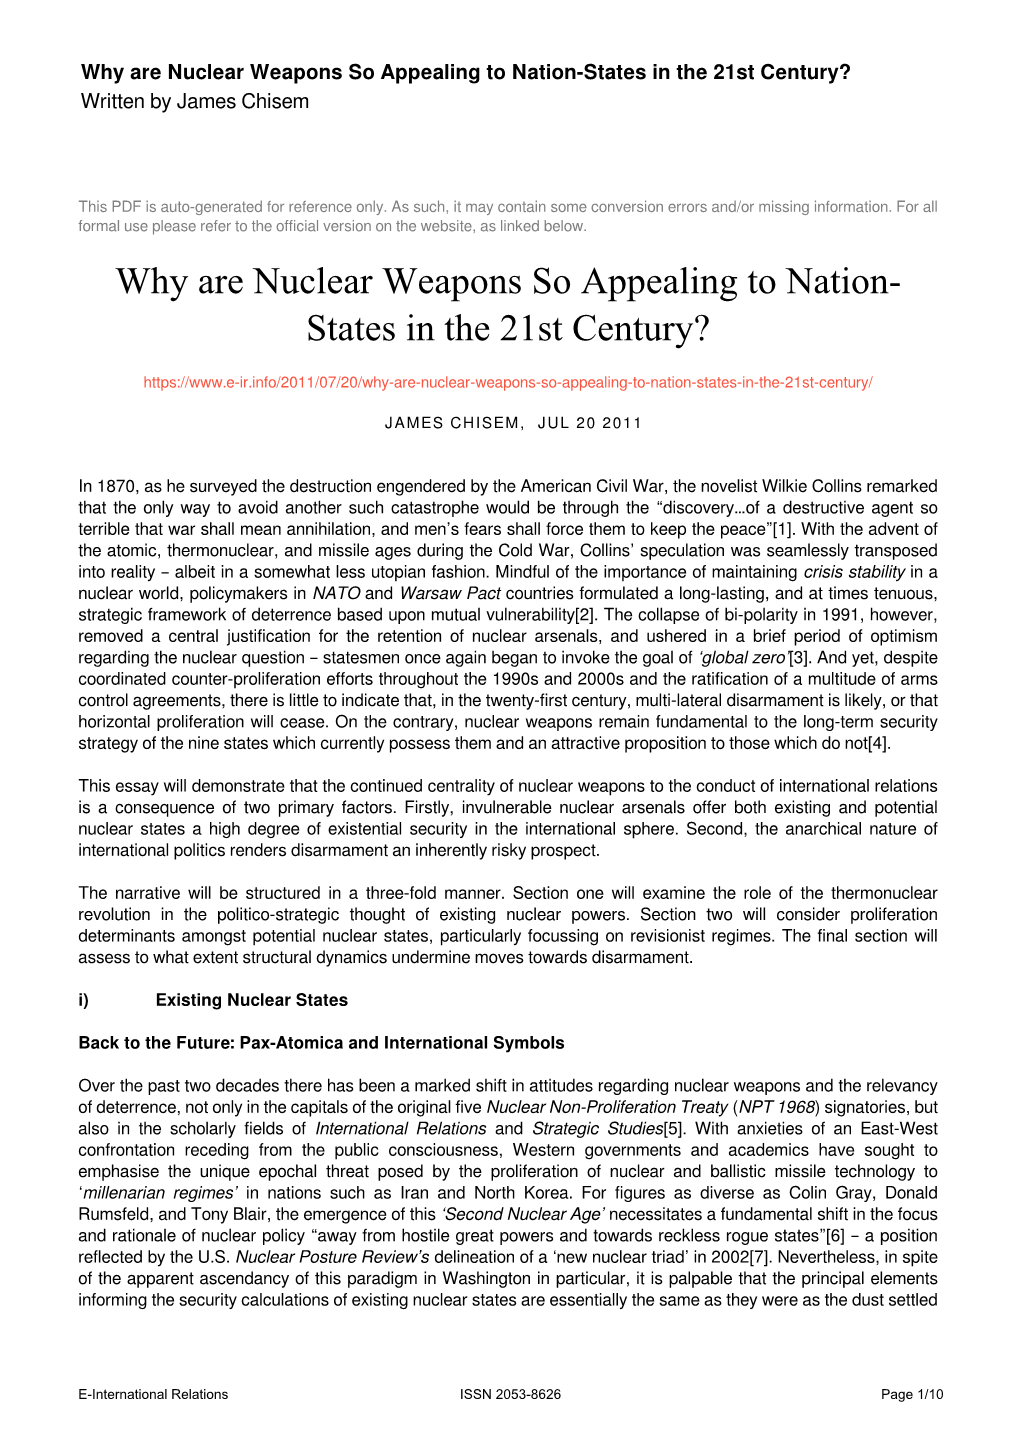 Why Are Nuclear Weapons So Appealing to Nation-States in the 21St Century? Written by James Chisem